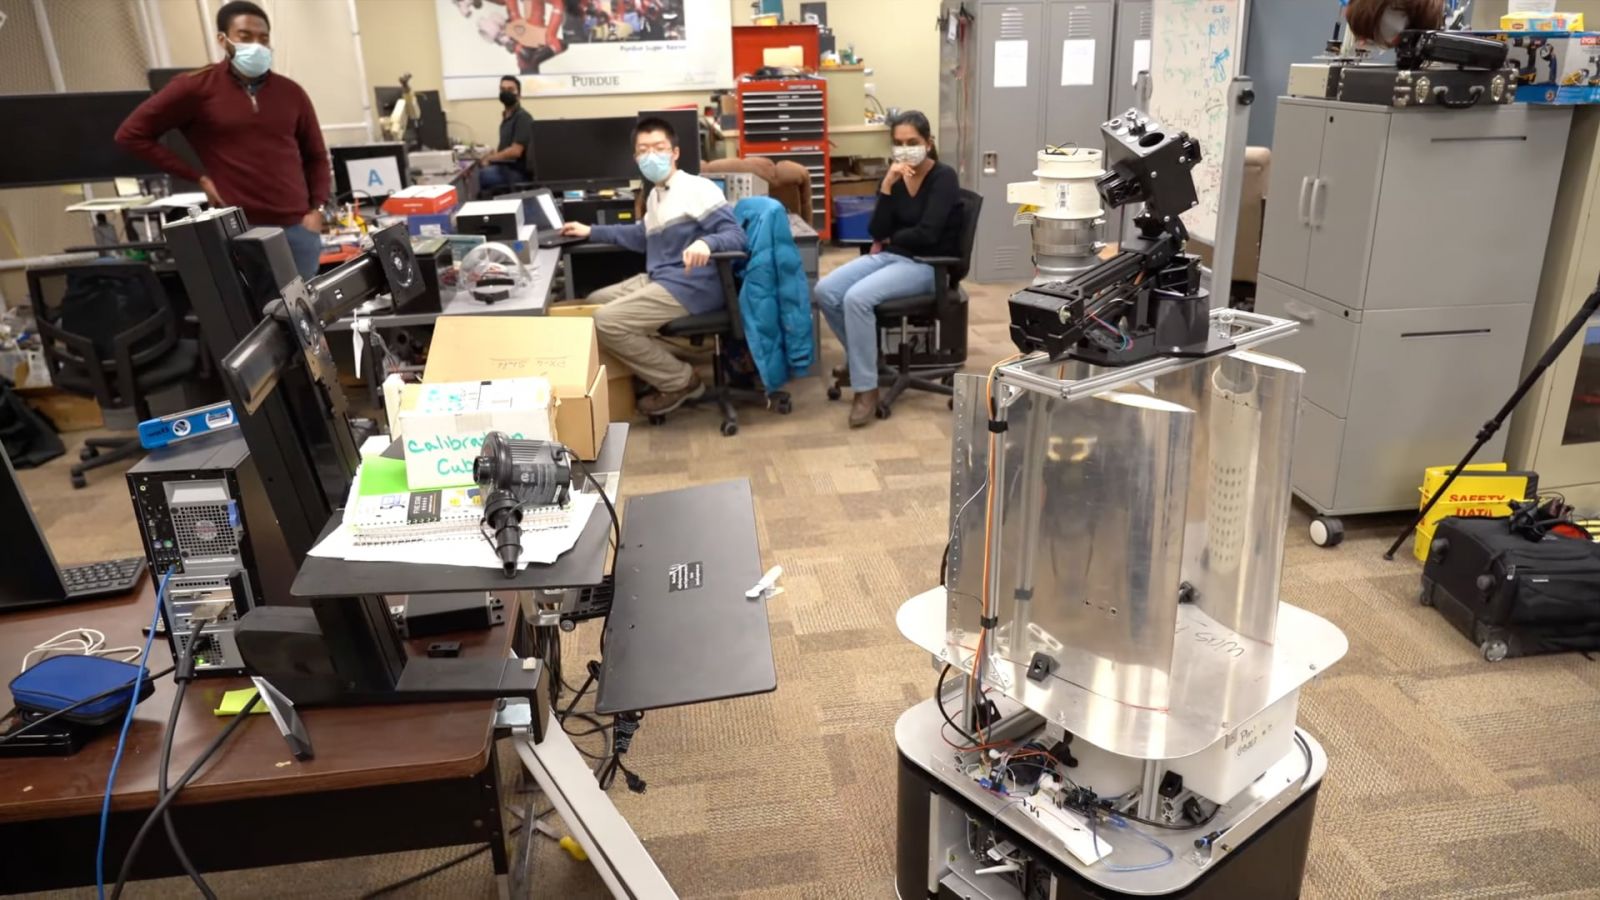 An interdisciplinary group of Purdue researchers, including Purdue Polytechnic's Haoguang Yang (center), test a robot designed to disinfect classrooms. (Image courtesy Purdue Mechanical Engineering)